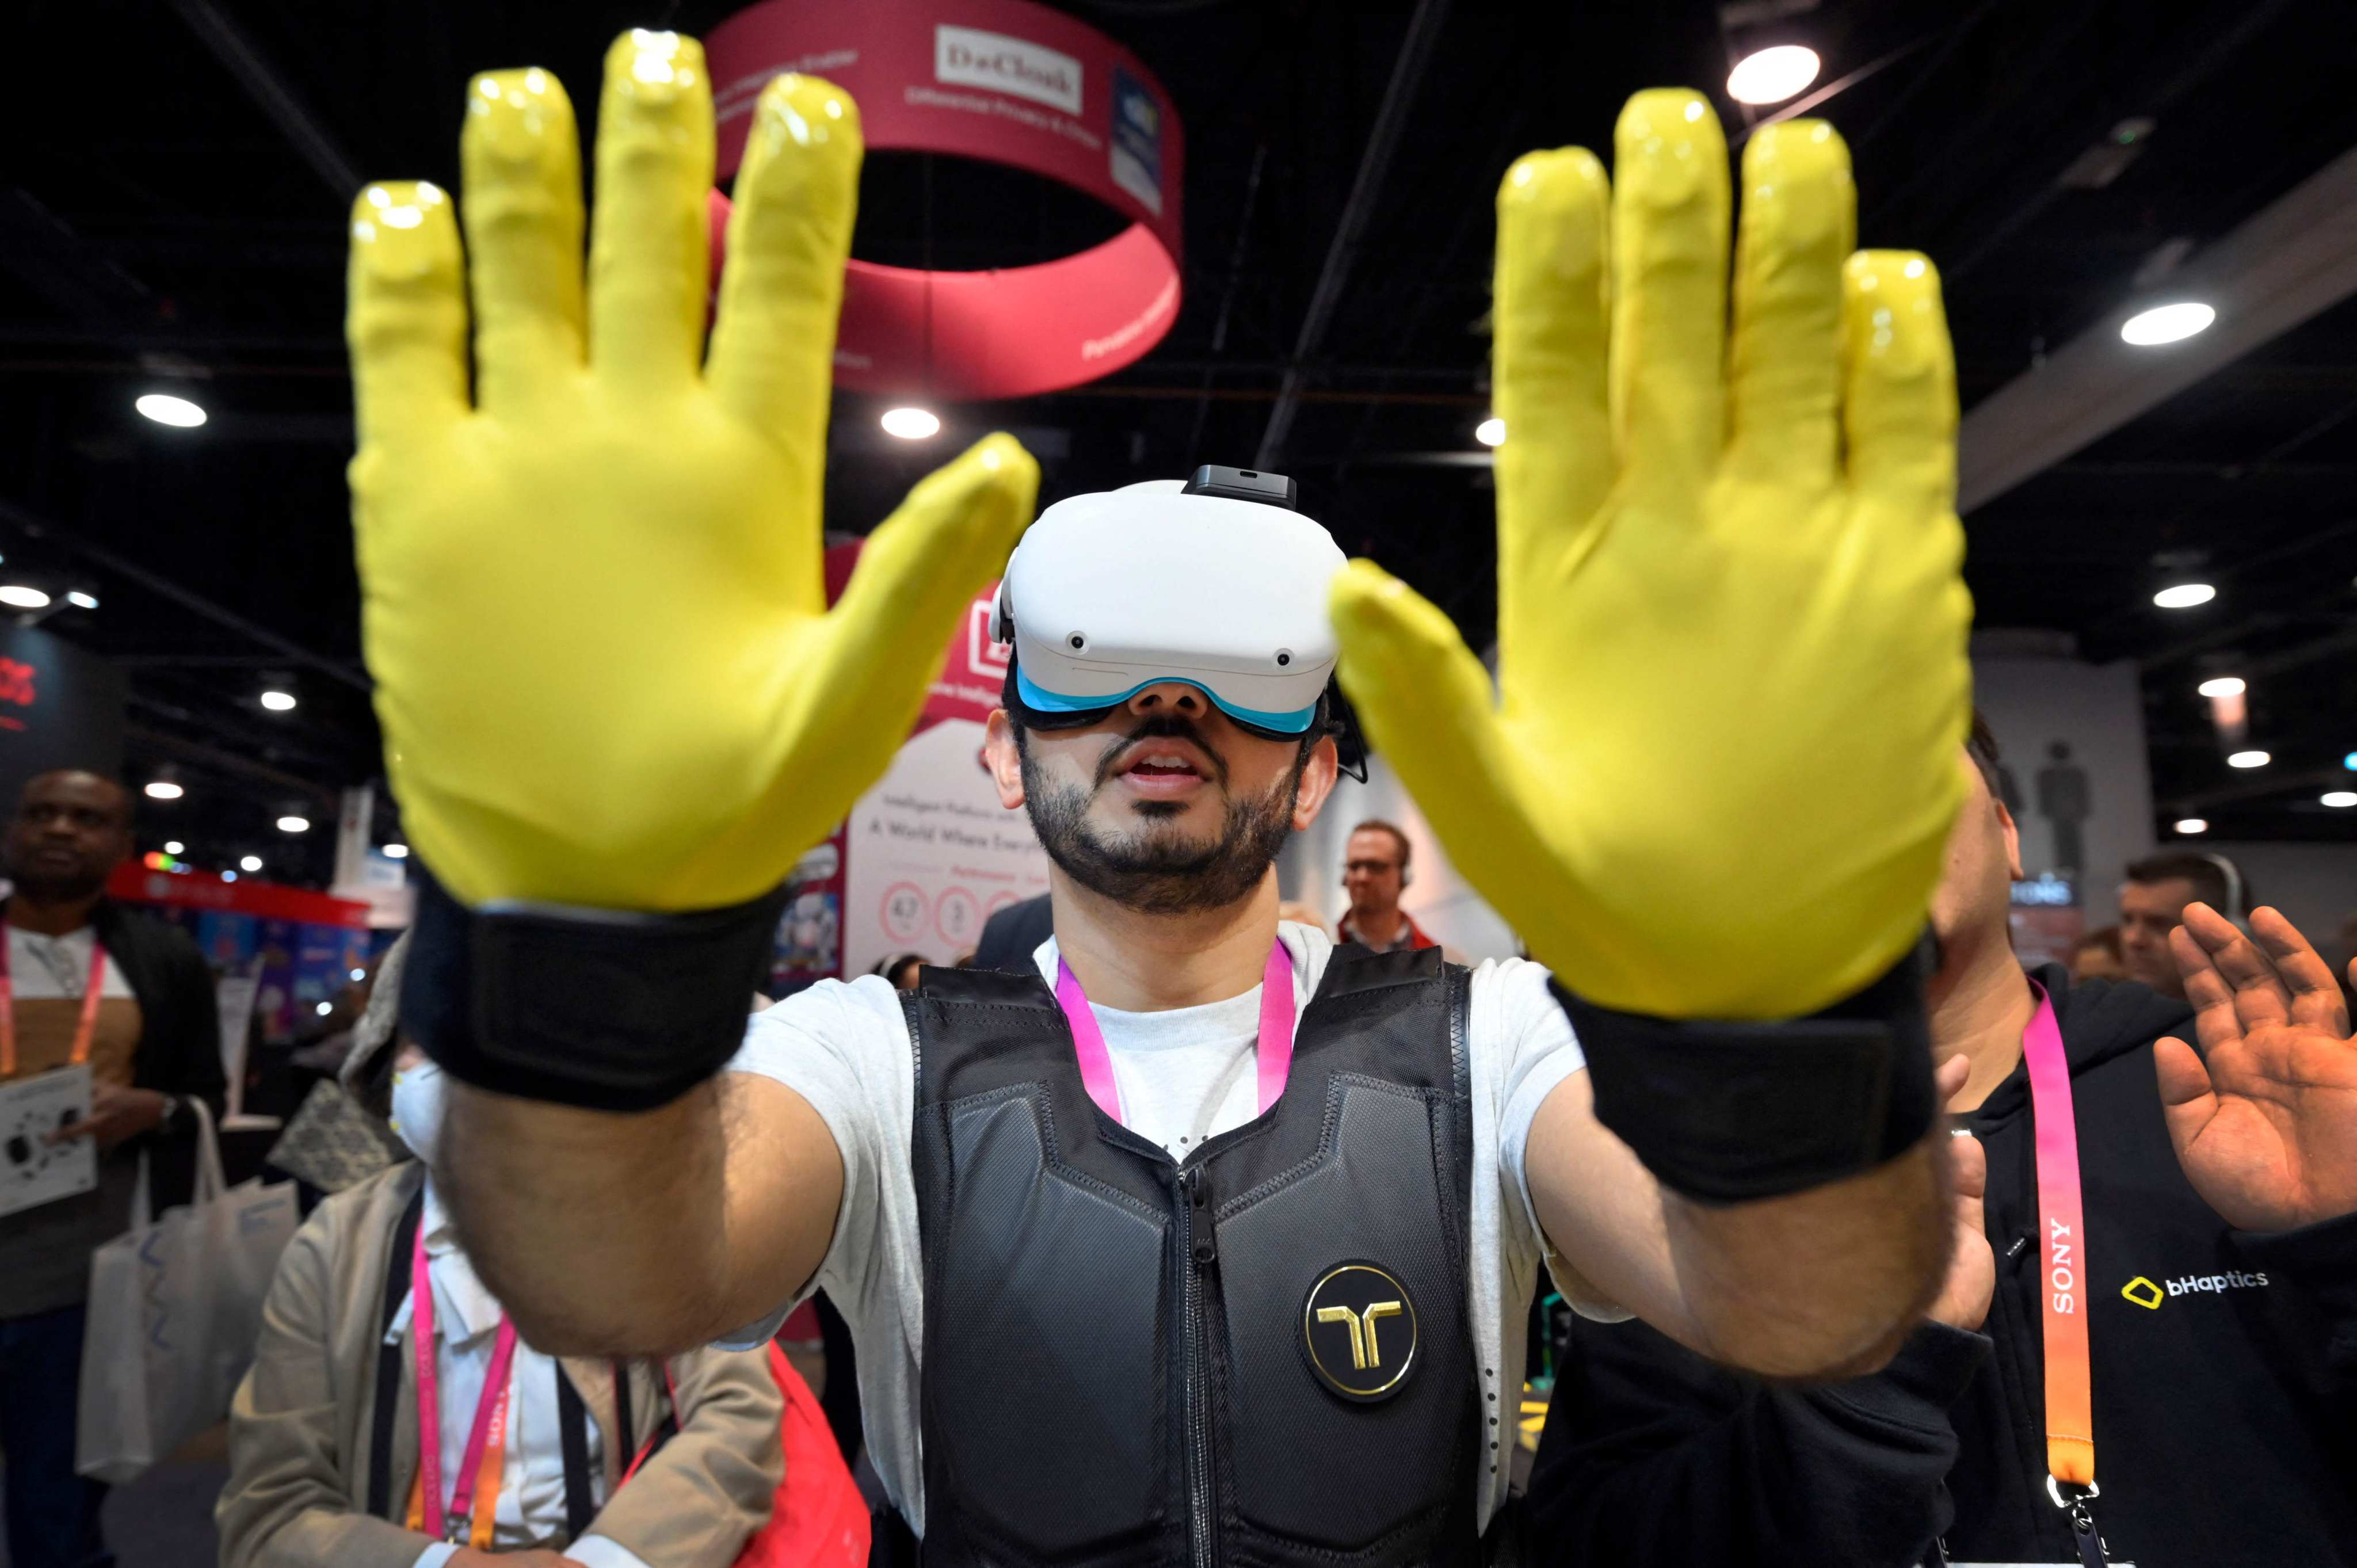 An attendee uses tactile gloves and vest during a VR demonstration at the bHaptics booth during CES 2023 at the Las Vegas Convention Center on January 6. Photo: Getty Images via AFP